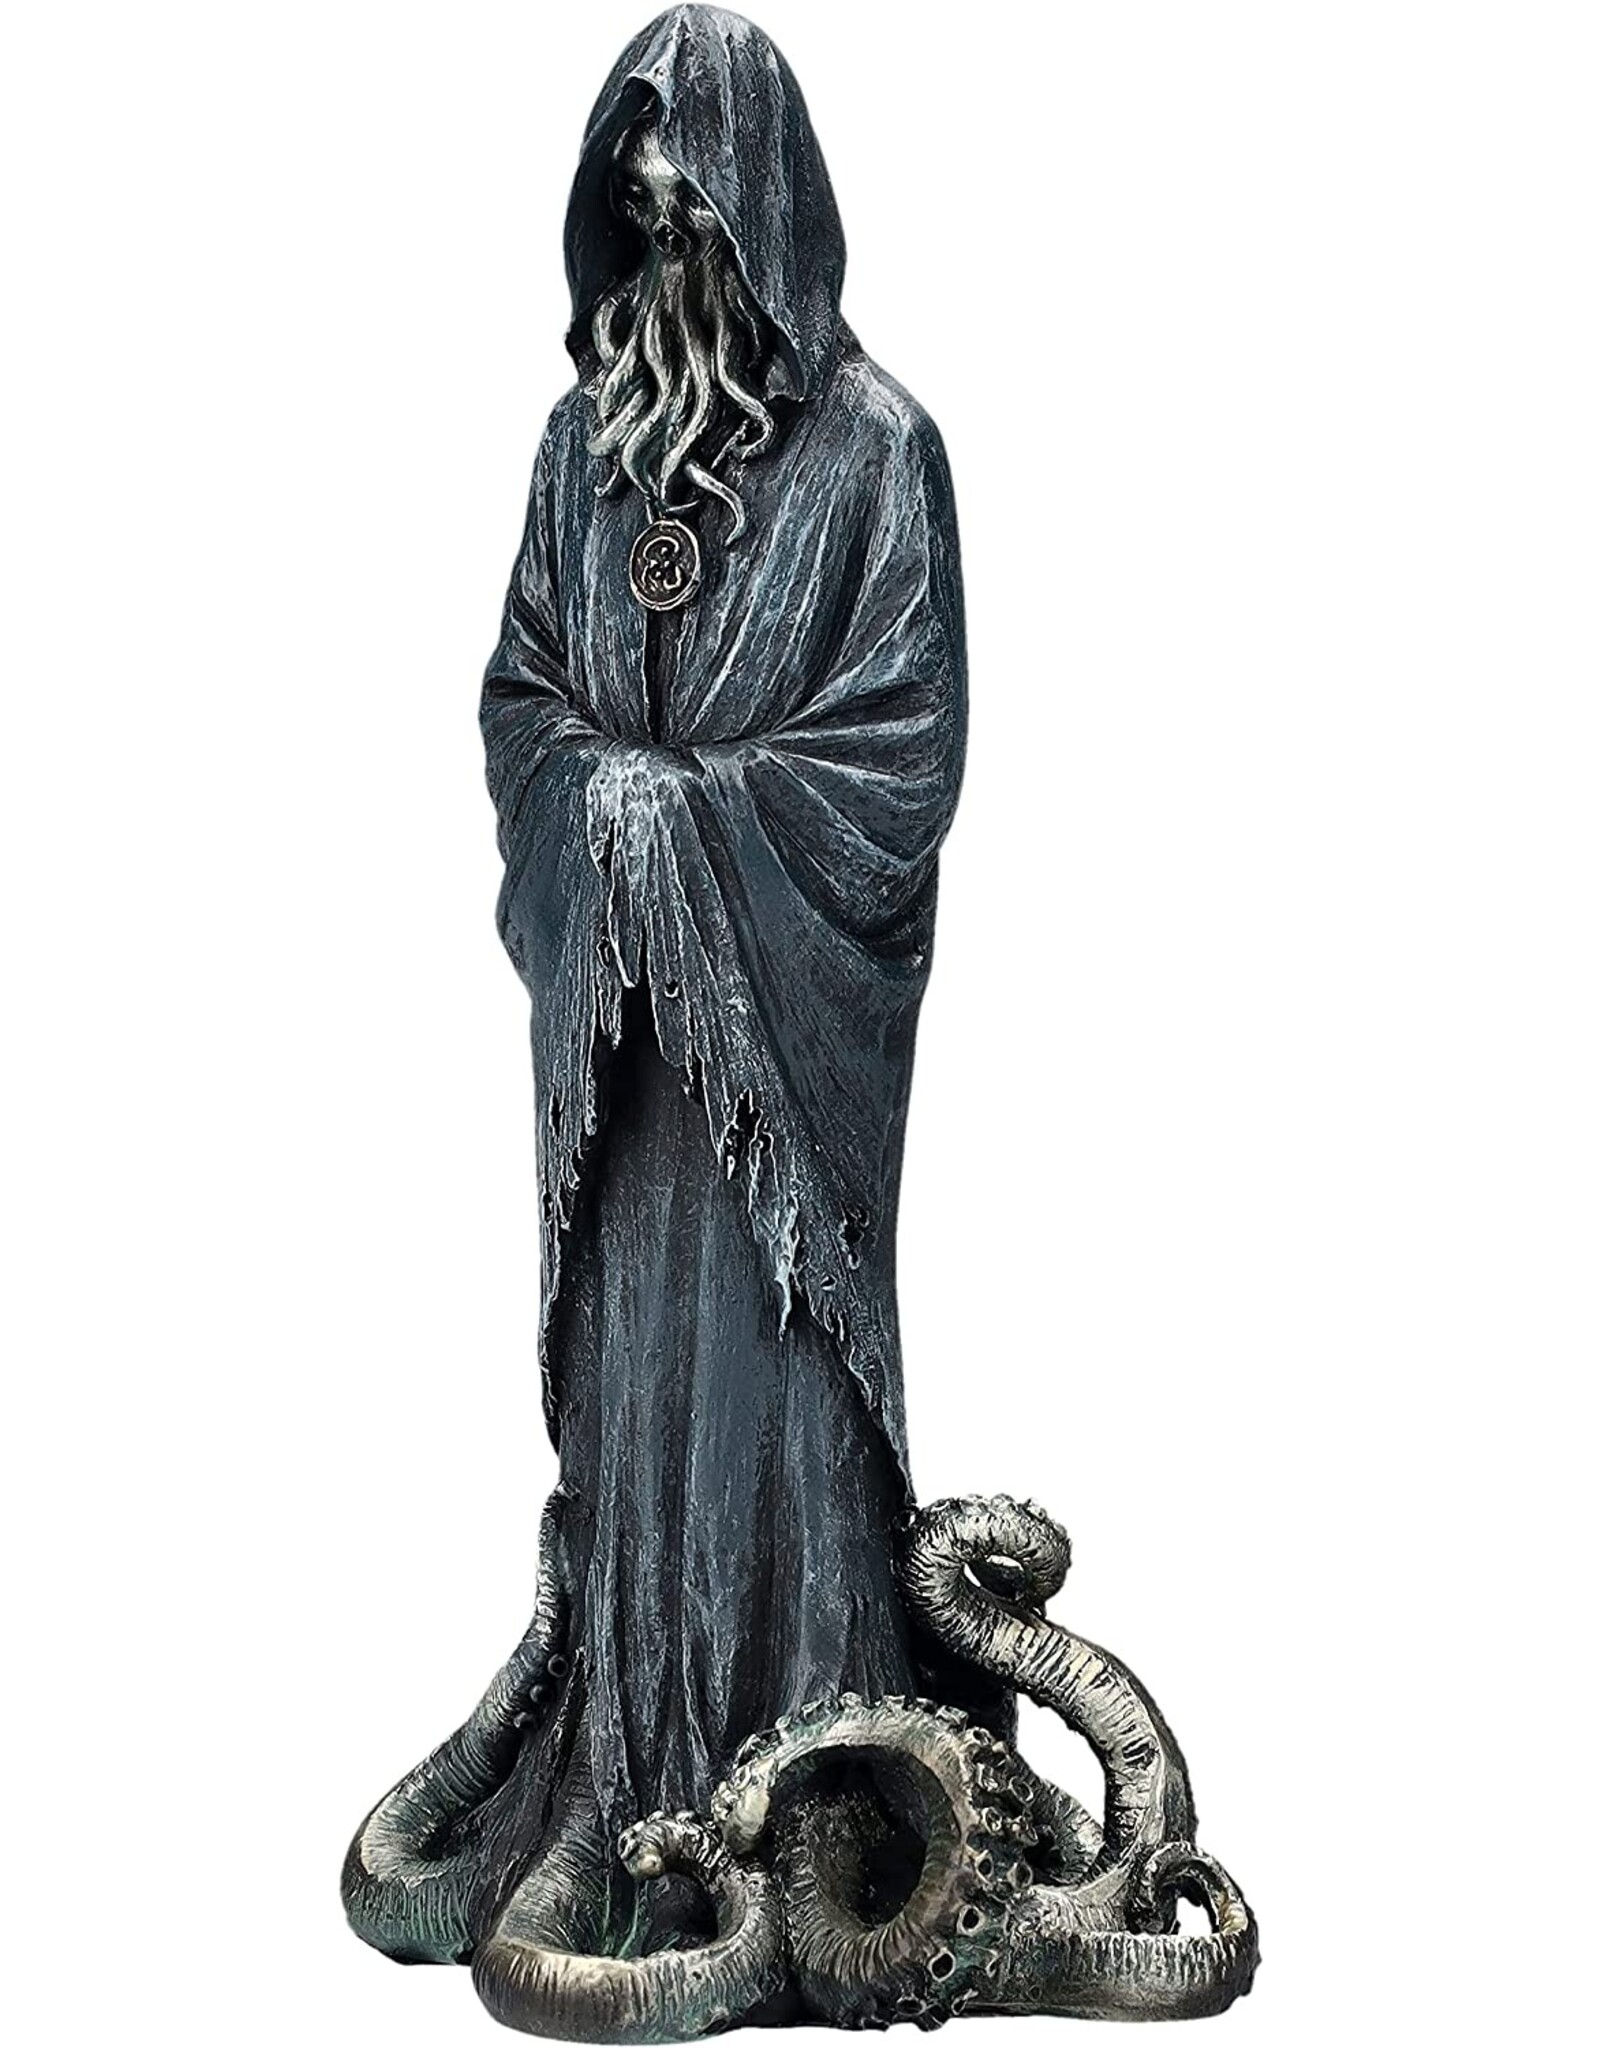 VG Giftware & Lifestyle - Call of Cthulhu Reaper figurine 20cm